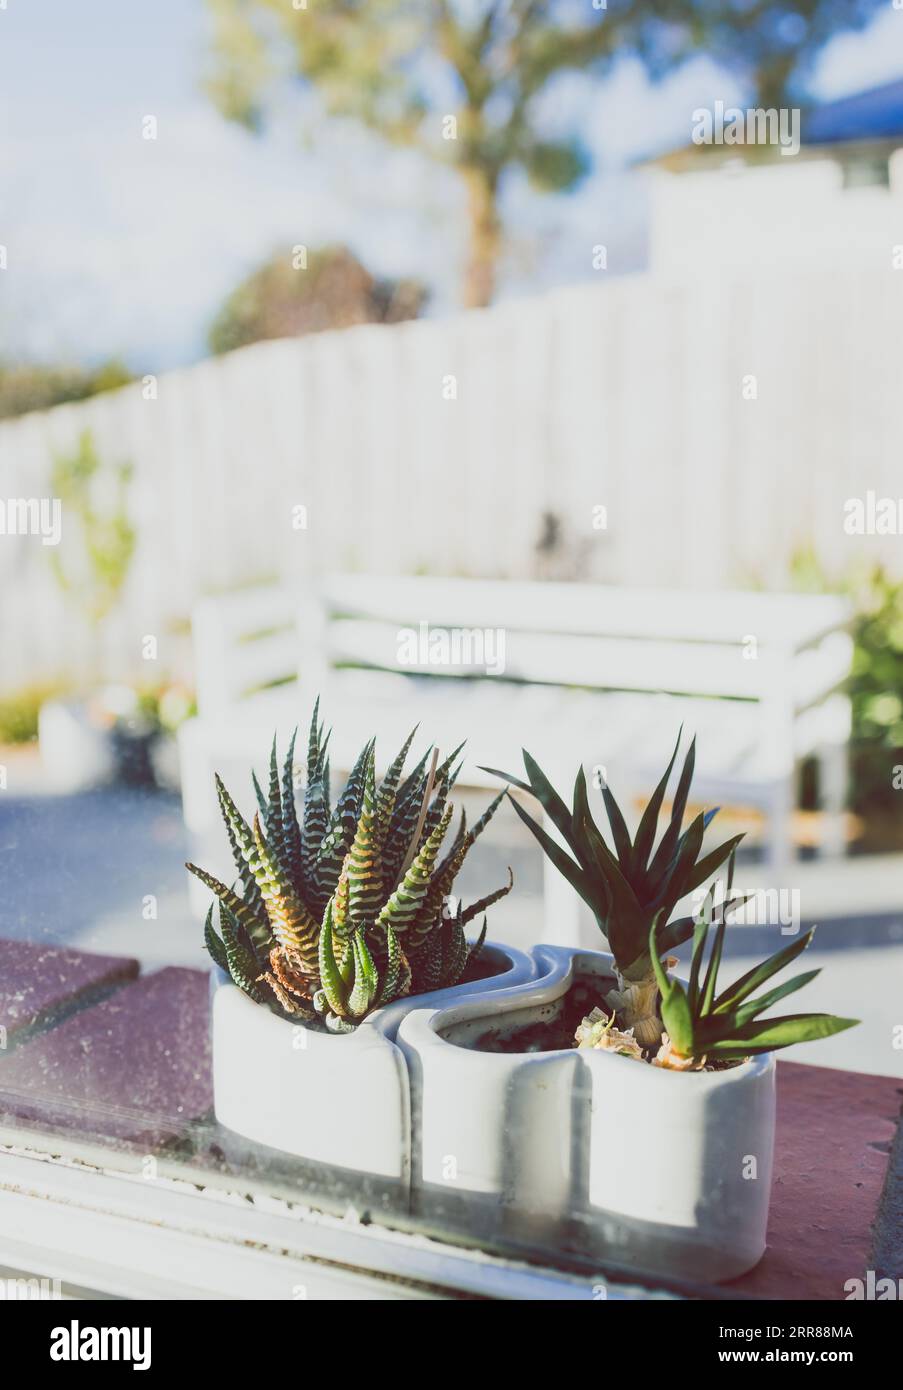 succulent plants on window seal with idyllic sunny backyard patio  in the background shot at shallow depth of field Stock Photo